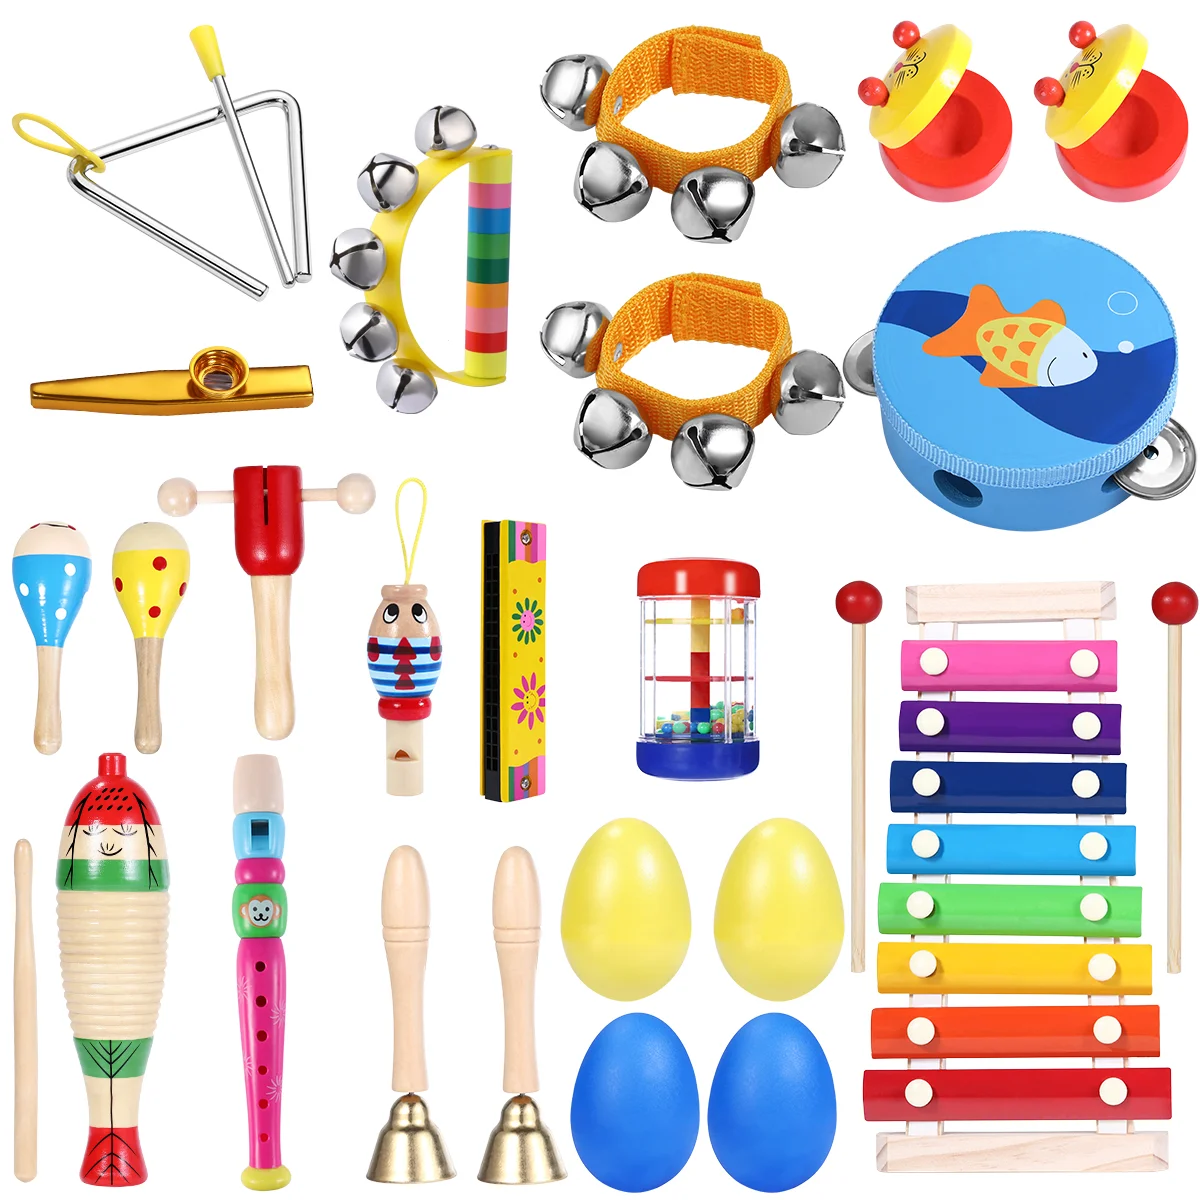 

iBaseToy Percussion Set Kids Children Toddlers Musical Toys Band Rhythm Kit Instruments for Preschool Educational Tools (23pcs)